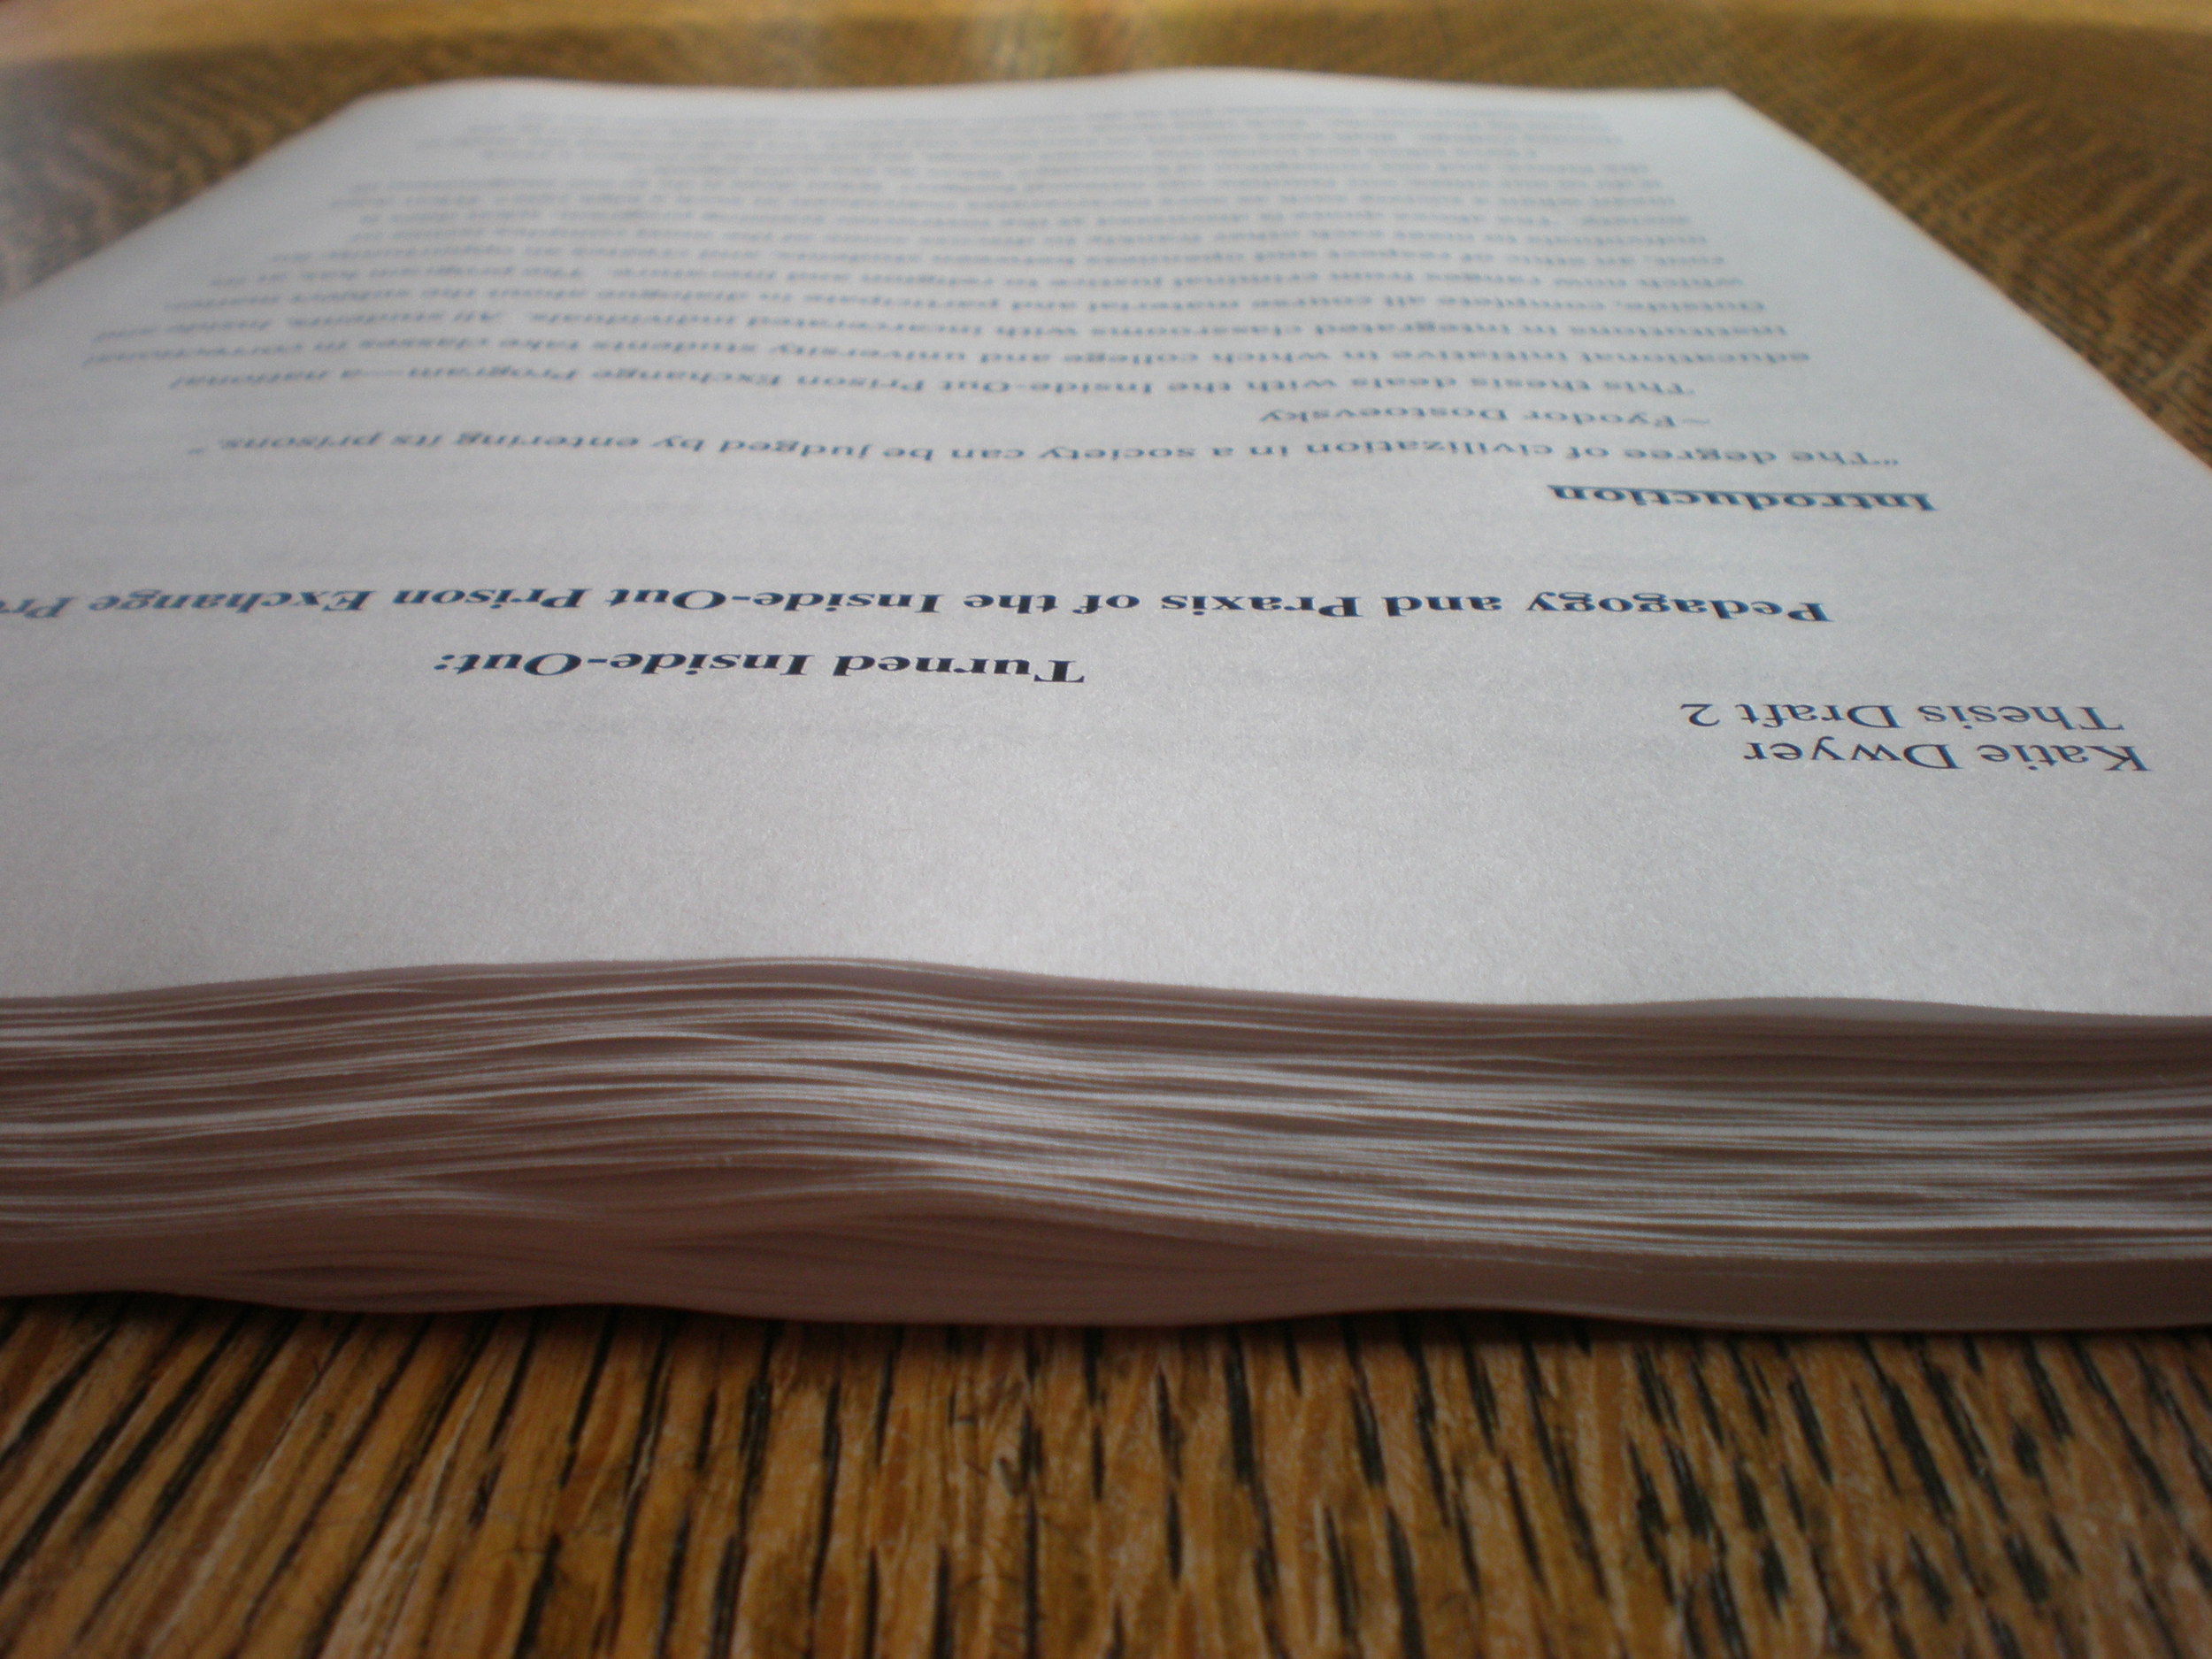 The first fully-printed draft of my undergraduate thesis.